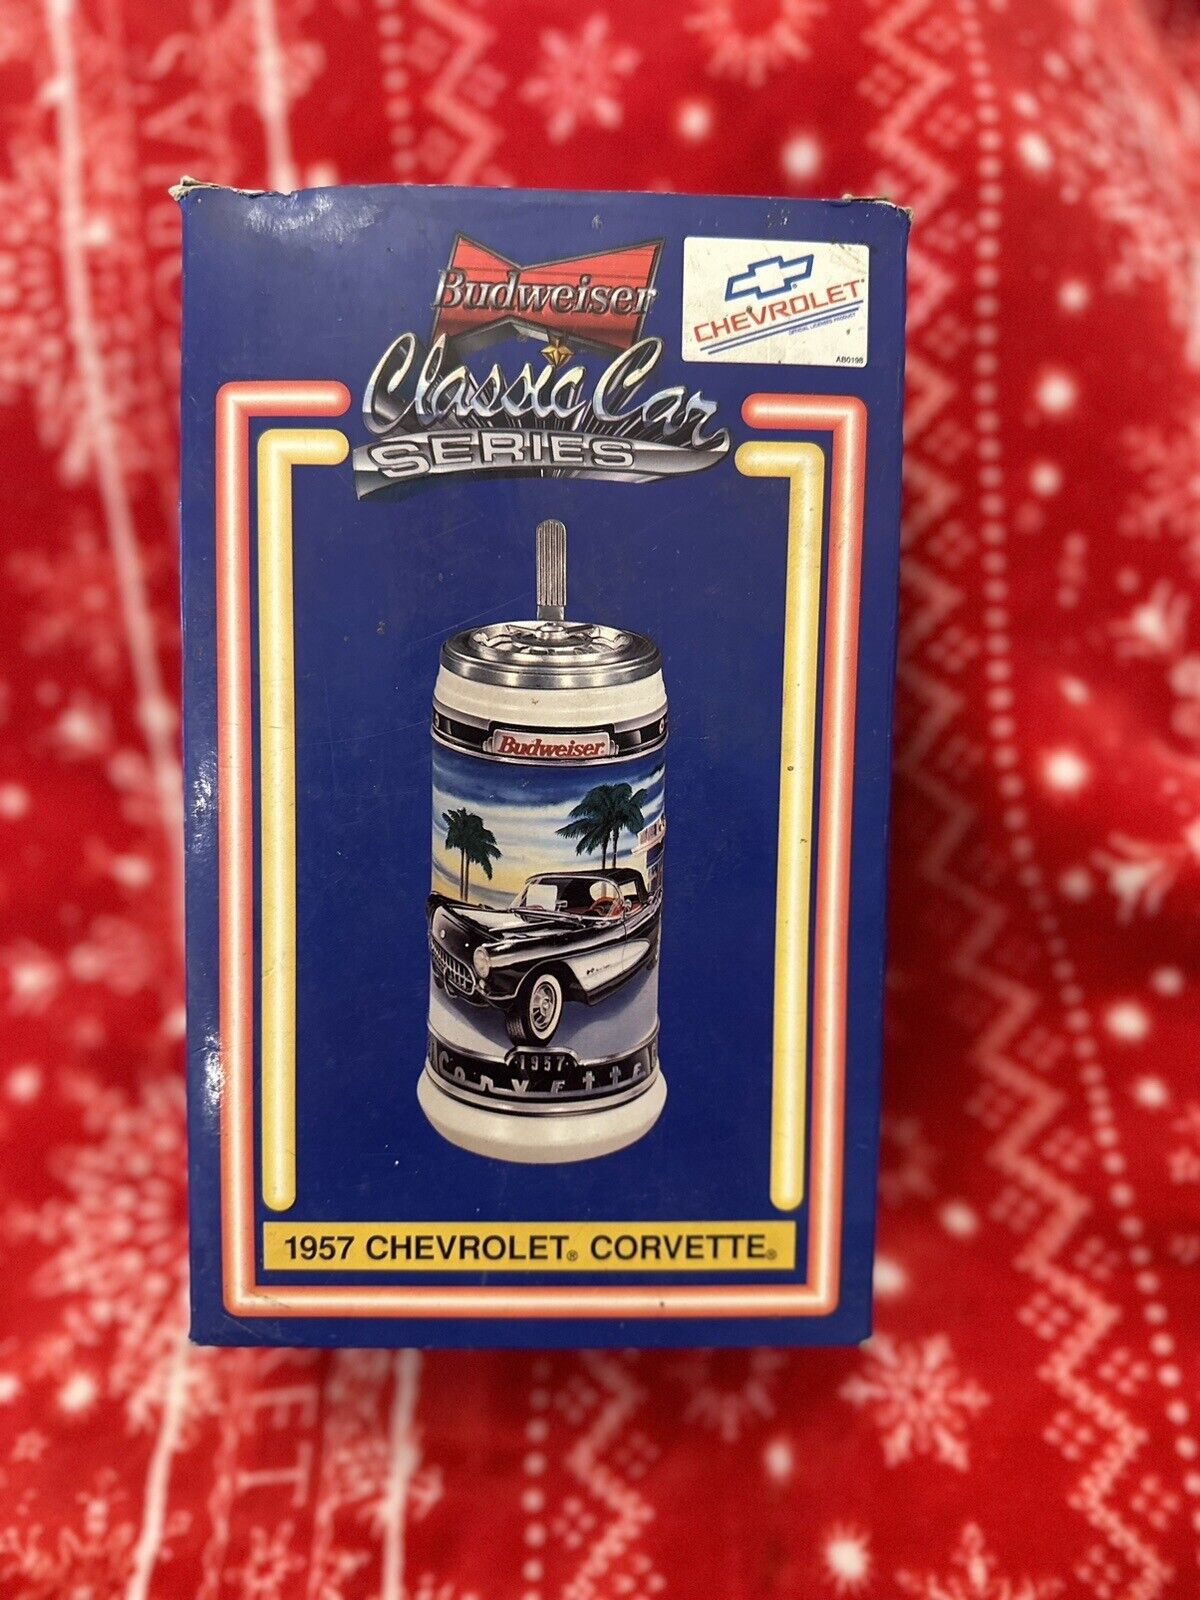 Budweiser Classic Car Series 1957 Chevy Corvette Beer Stein, new - Old stock